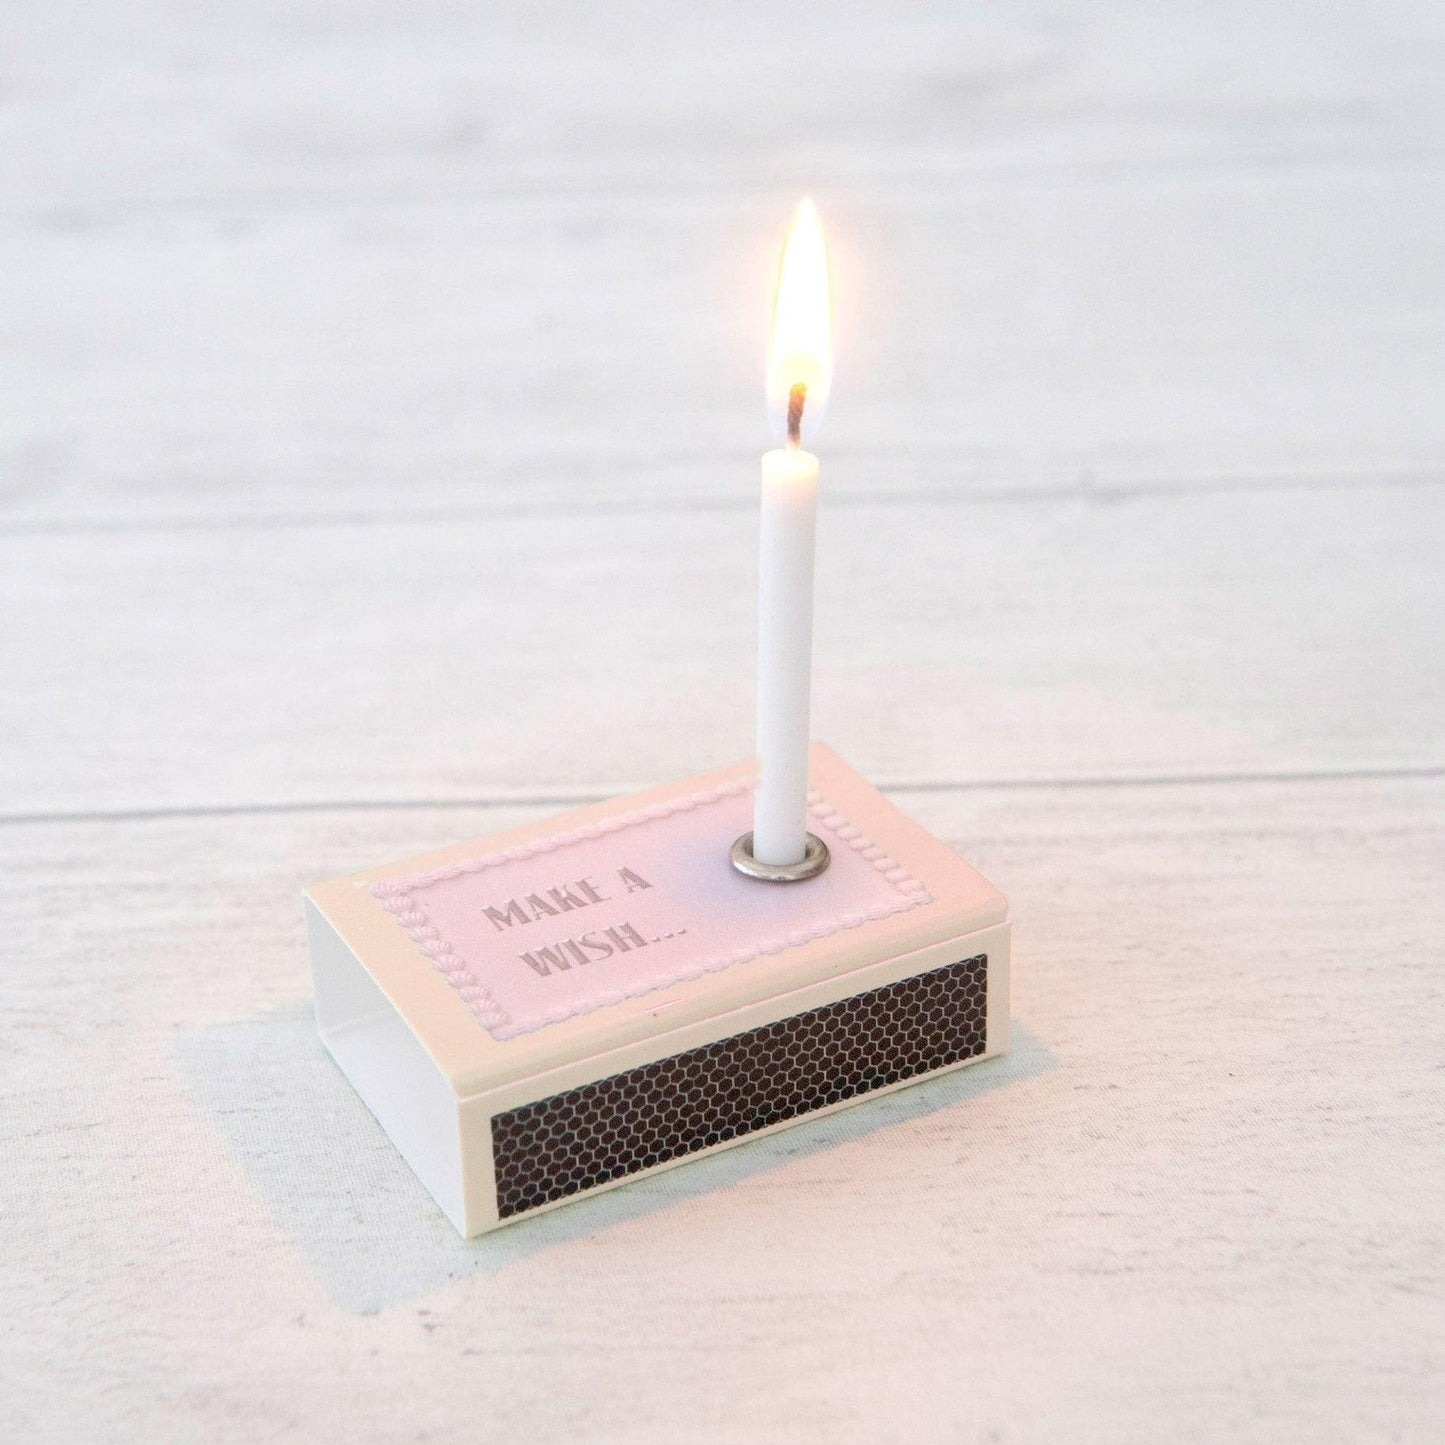 March Birth Flower and Candle Matchbox Gift - Peppy & Sage